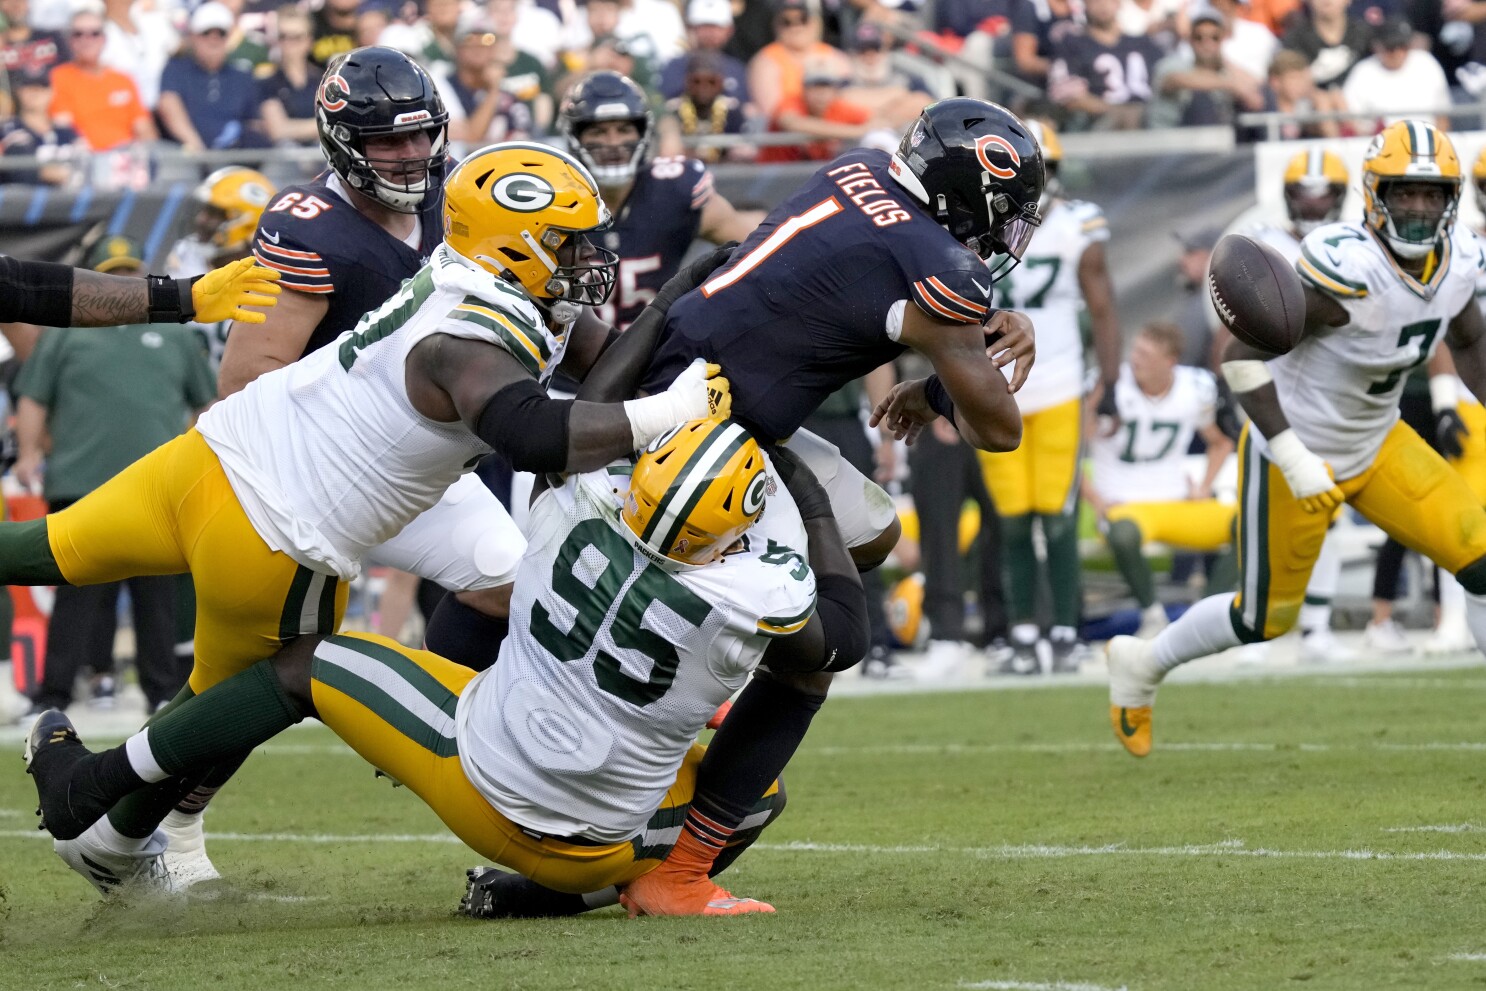 Takeaways from the Chicago Bears' NFL football loss to the Green Bay Packers